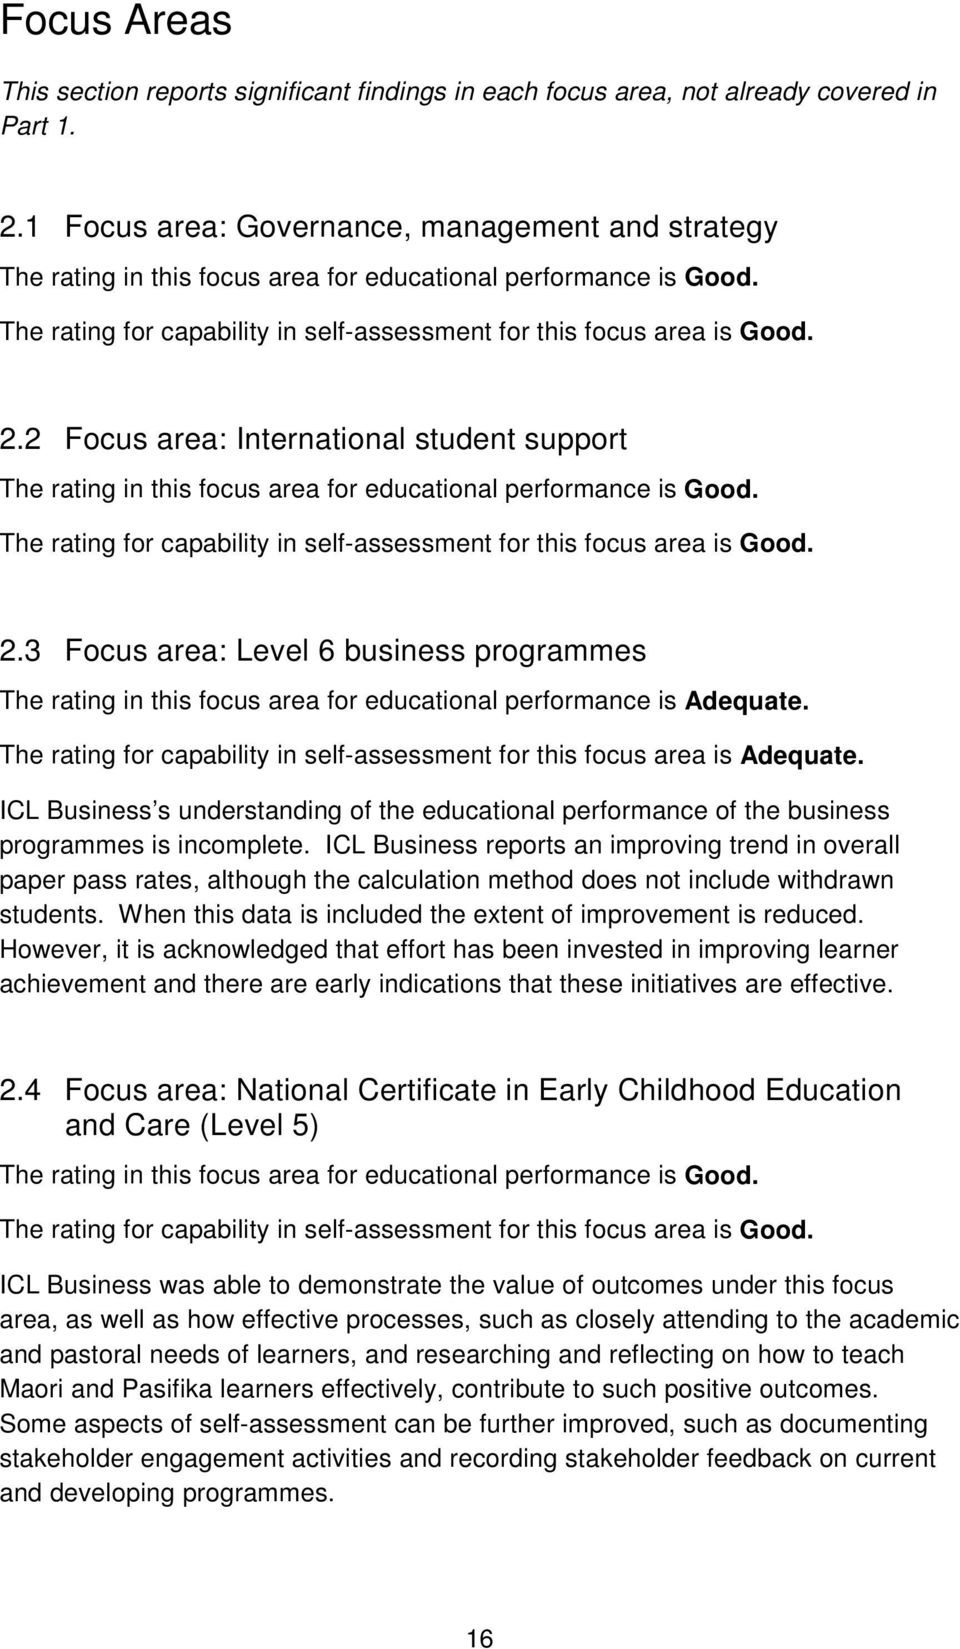 2 Focus area: International student support The rating in this focus area for educational performance is Good. The rating for capability in self-assessment for this focus area is Good. 2.